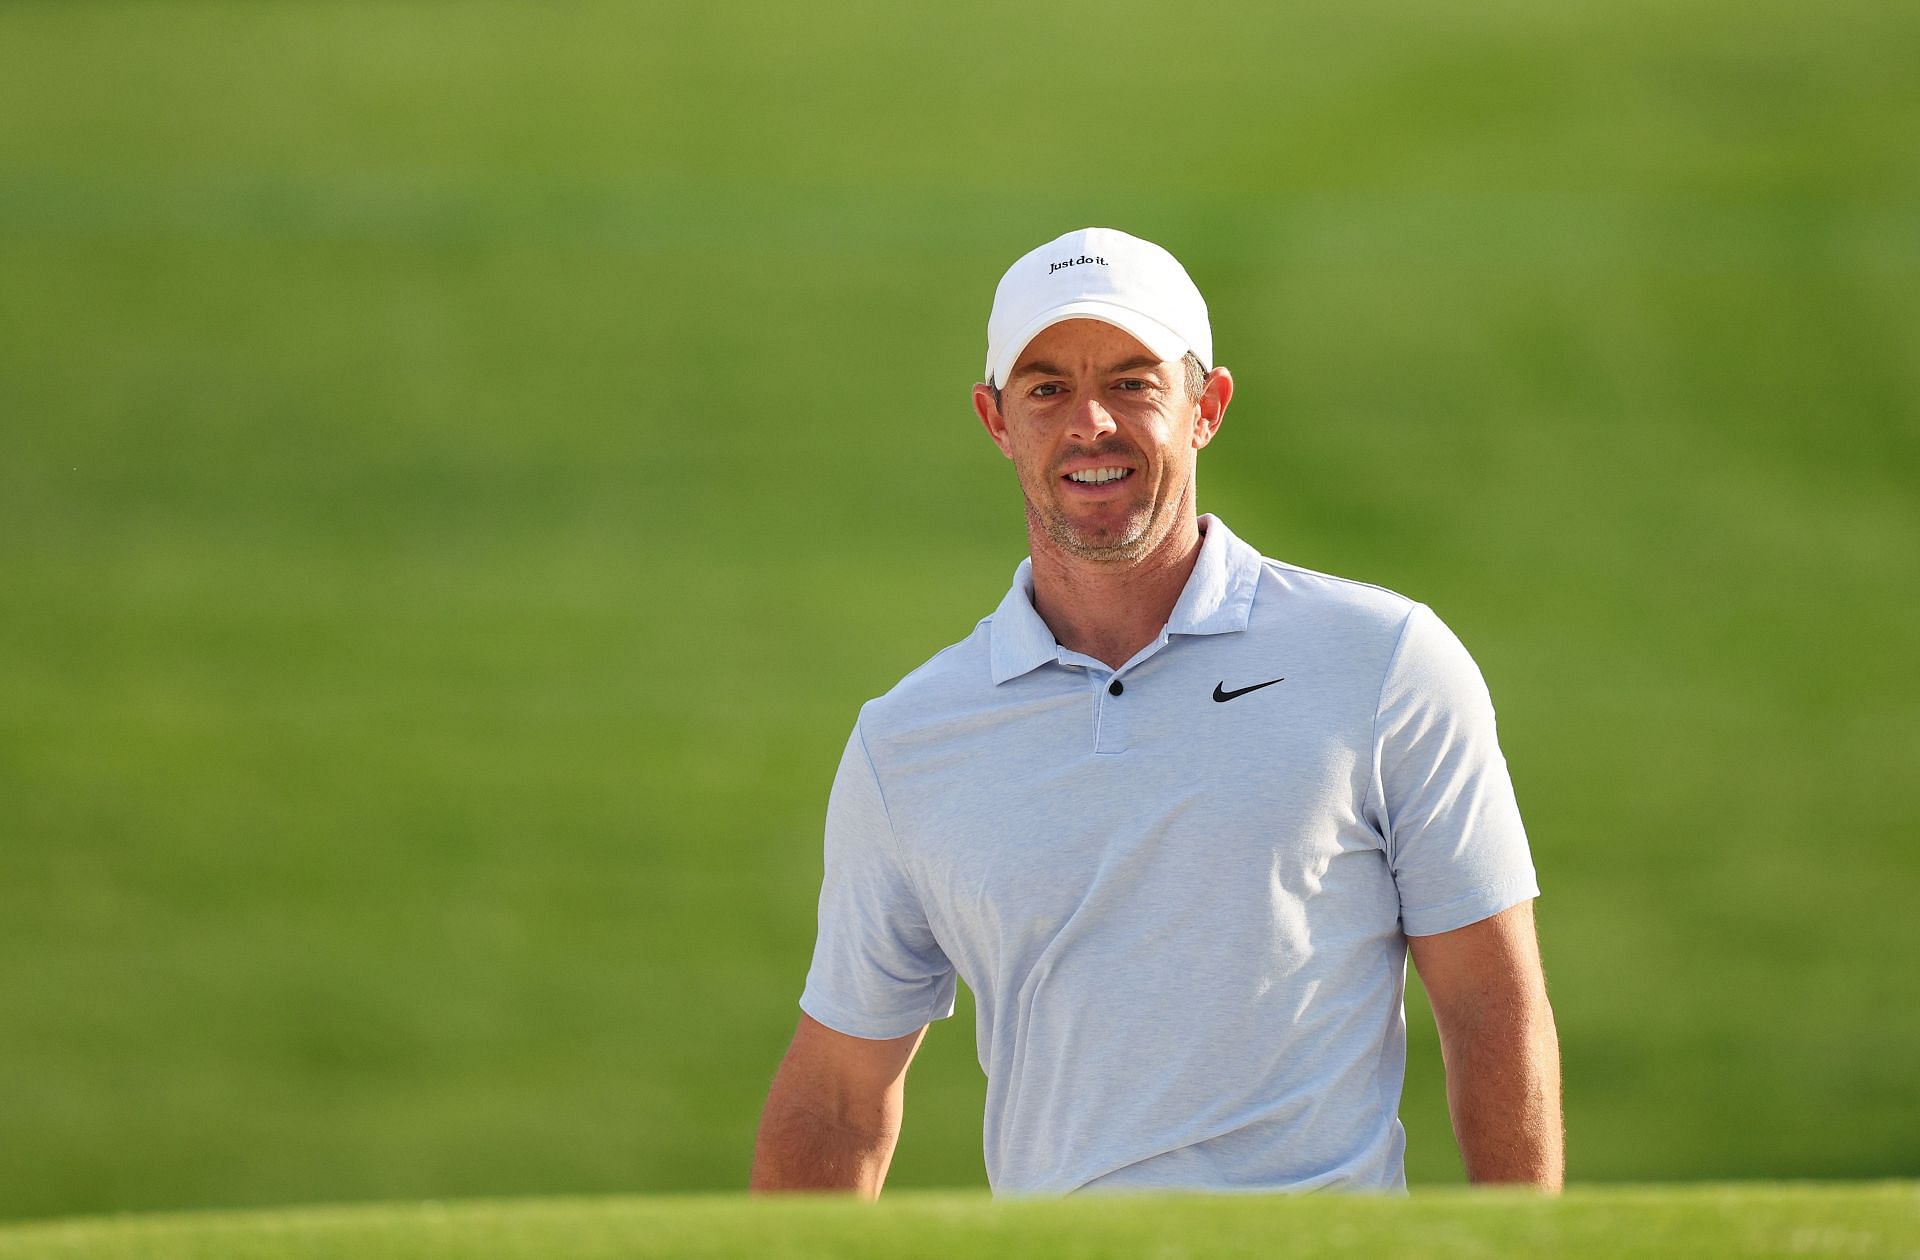 Rory McIlroy is not returning to the PGA Tour Policy Board